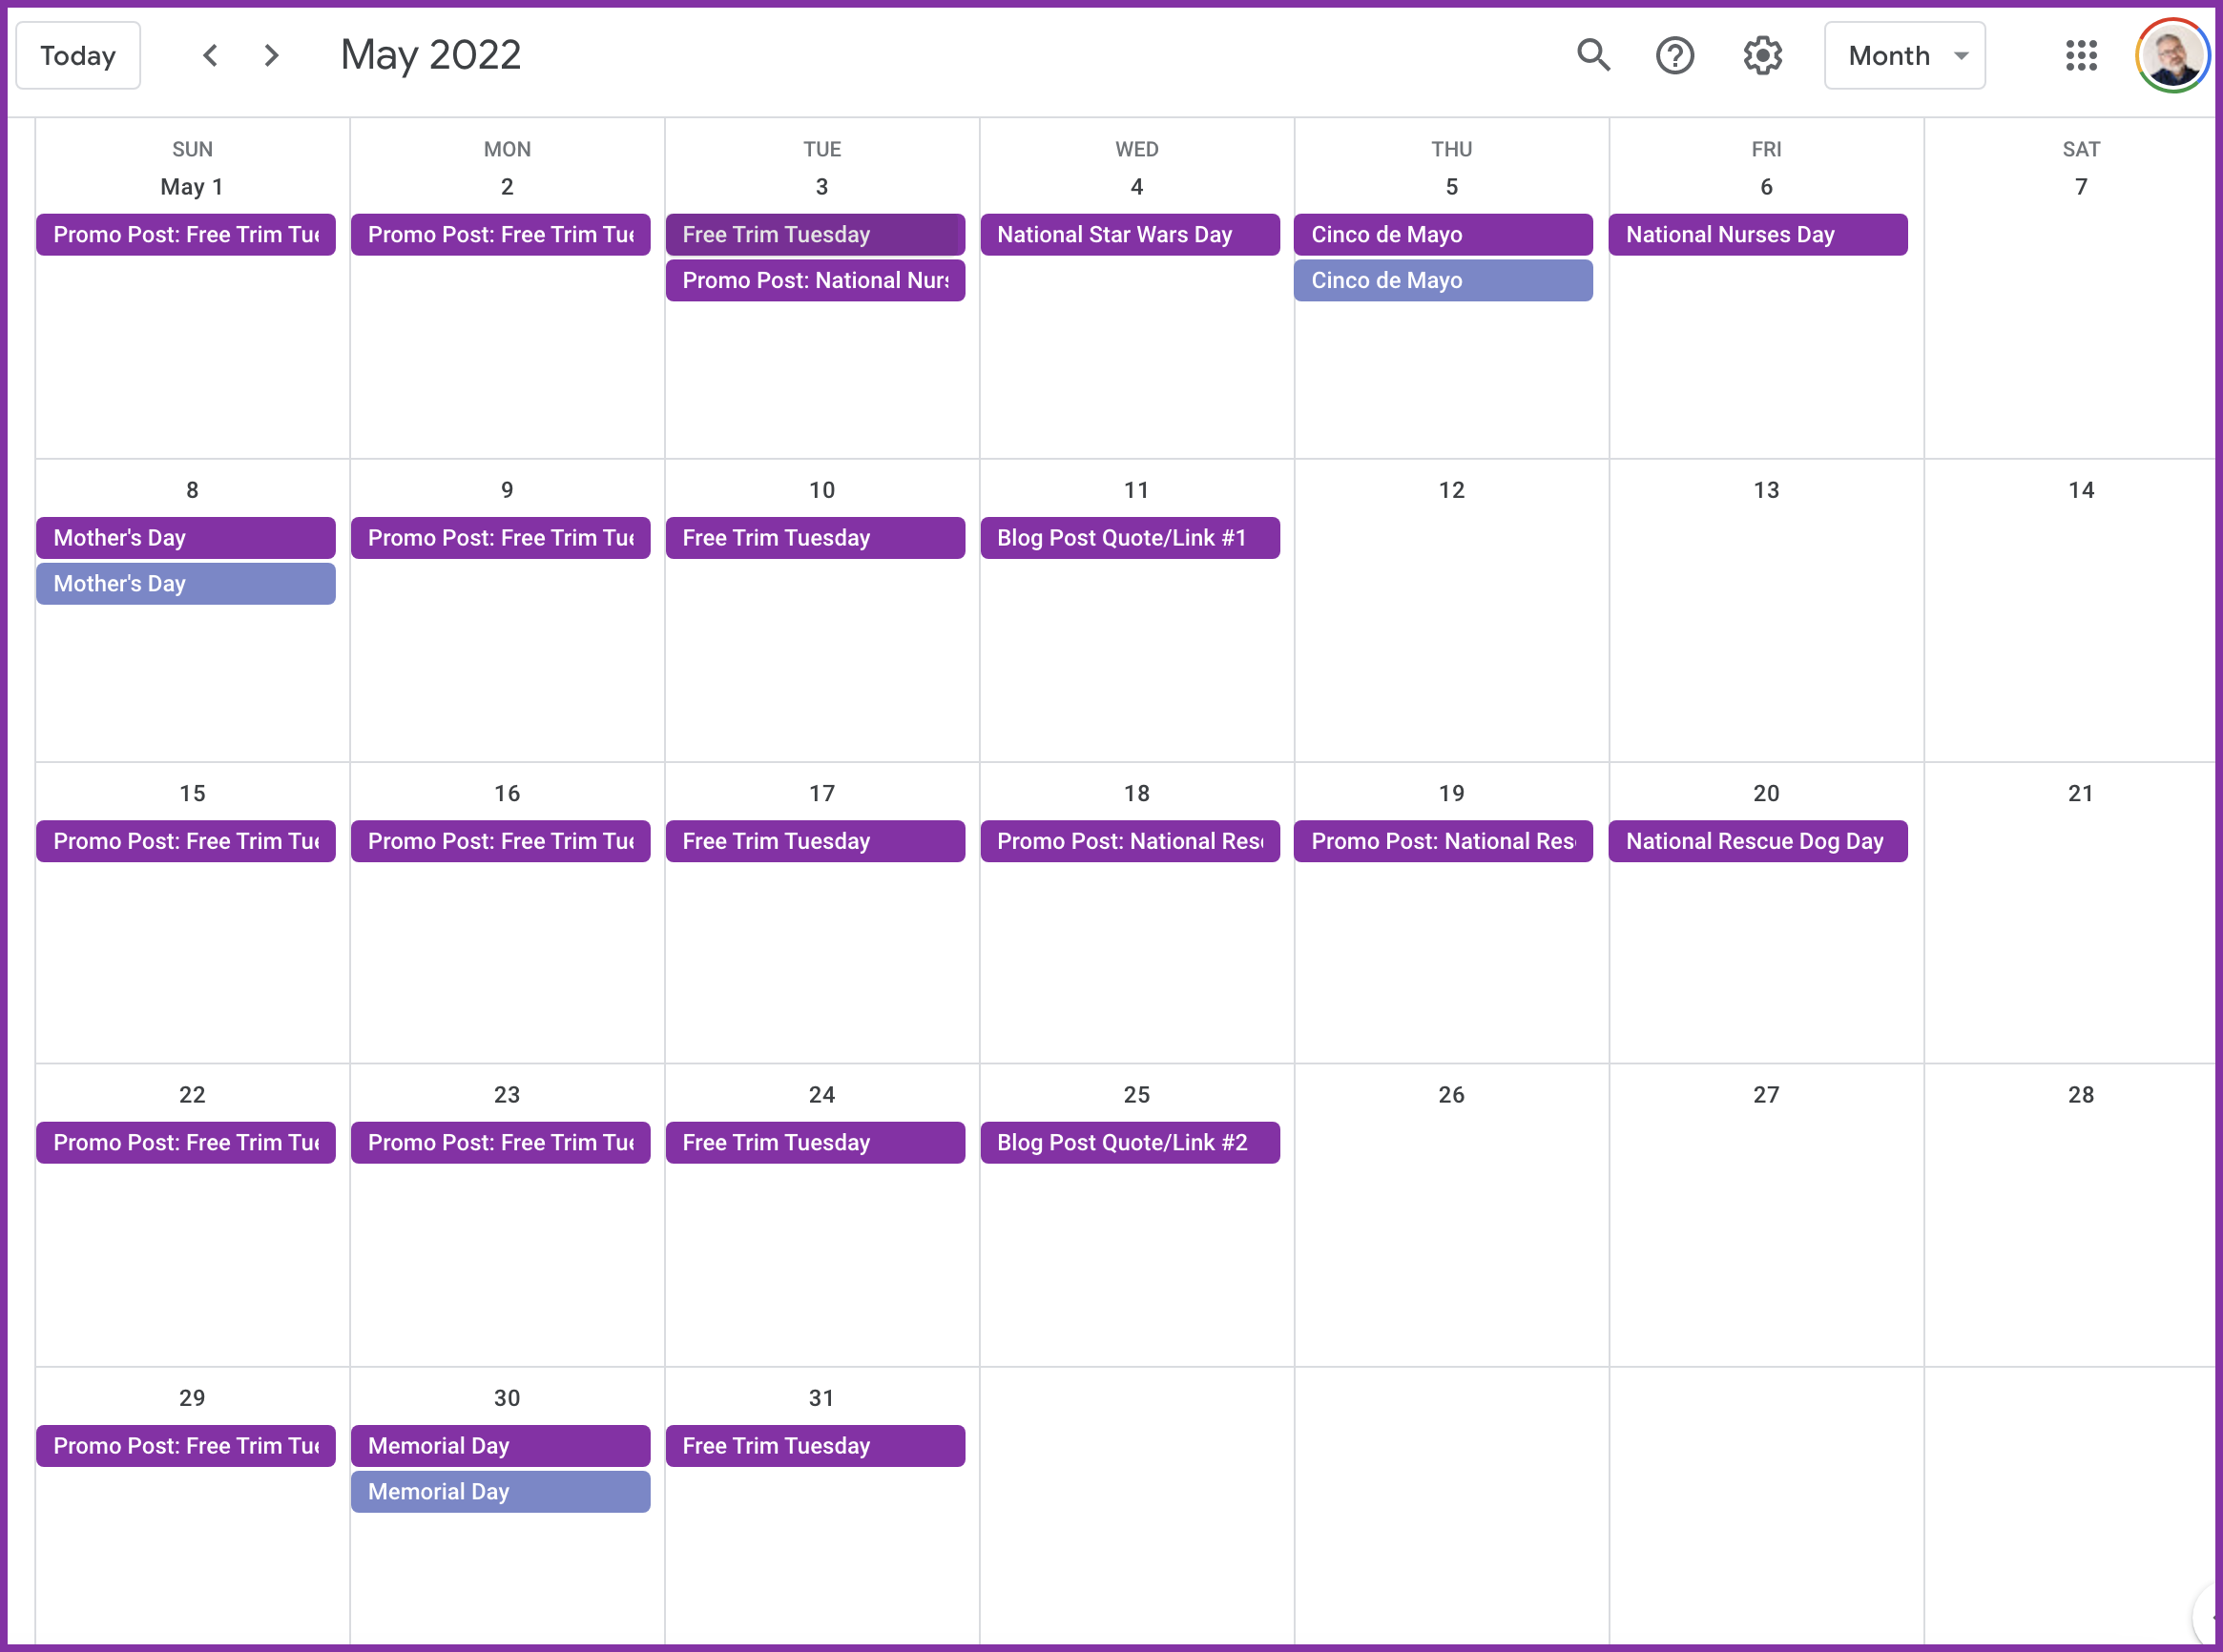 Adding your blog post promotional posts to your social media content calendar